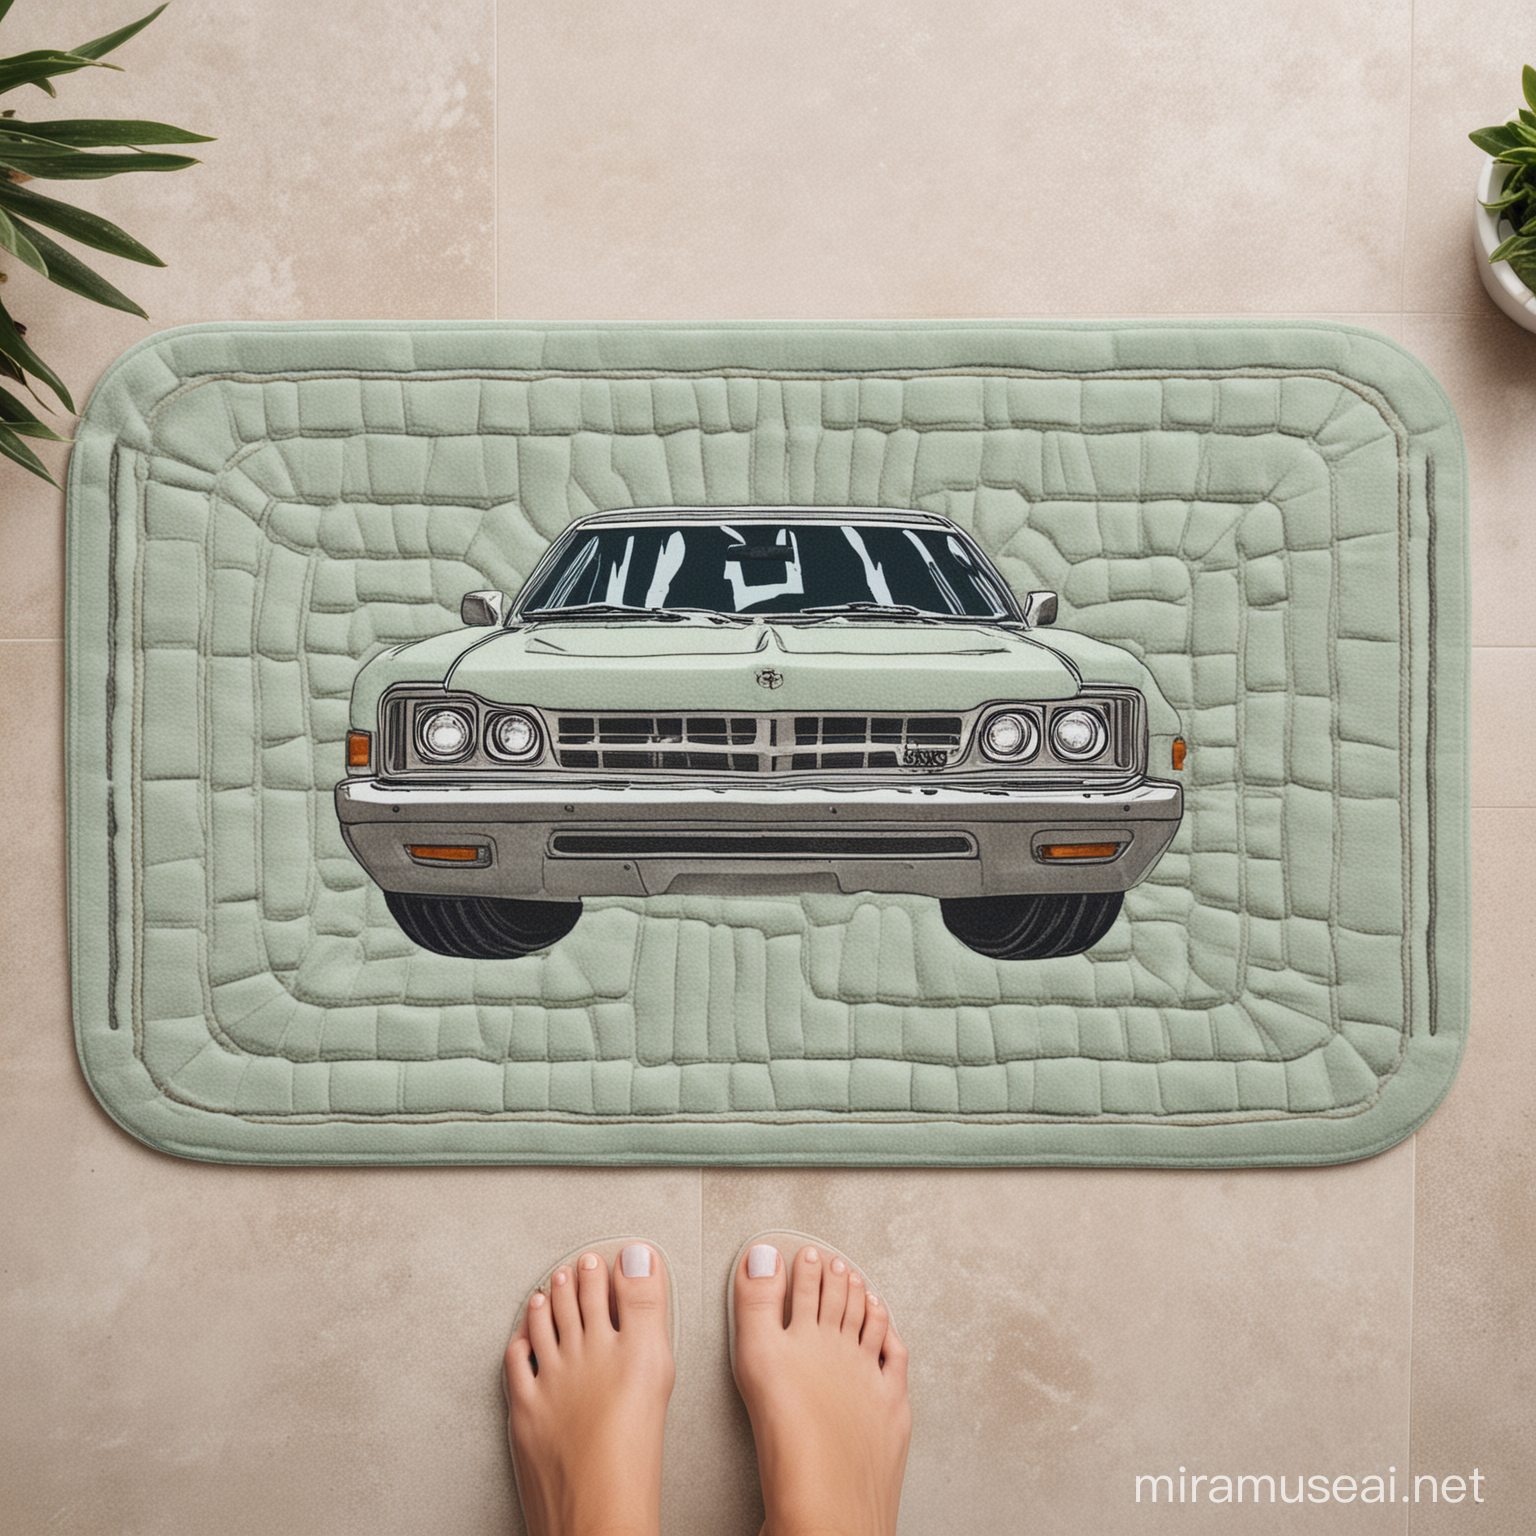 Playful and Whimsical UTE Funny Bath Mat Design